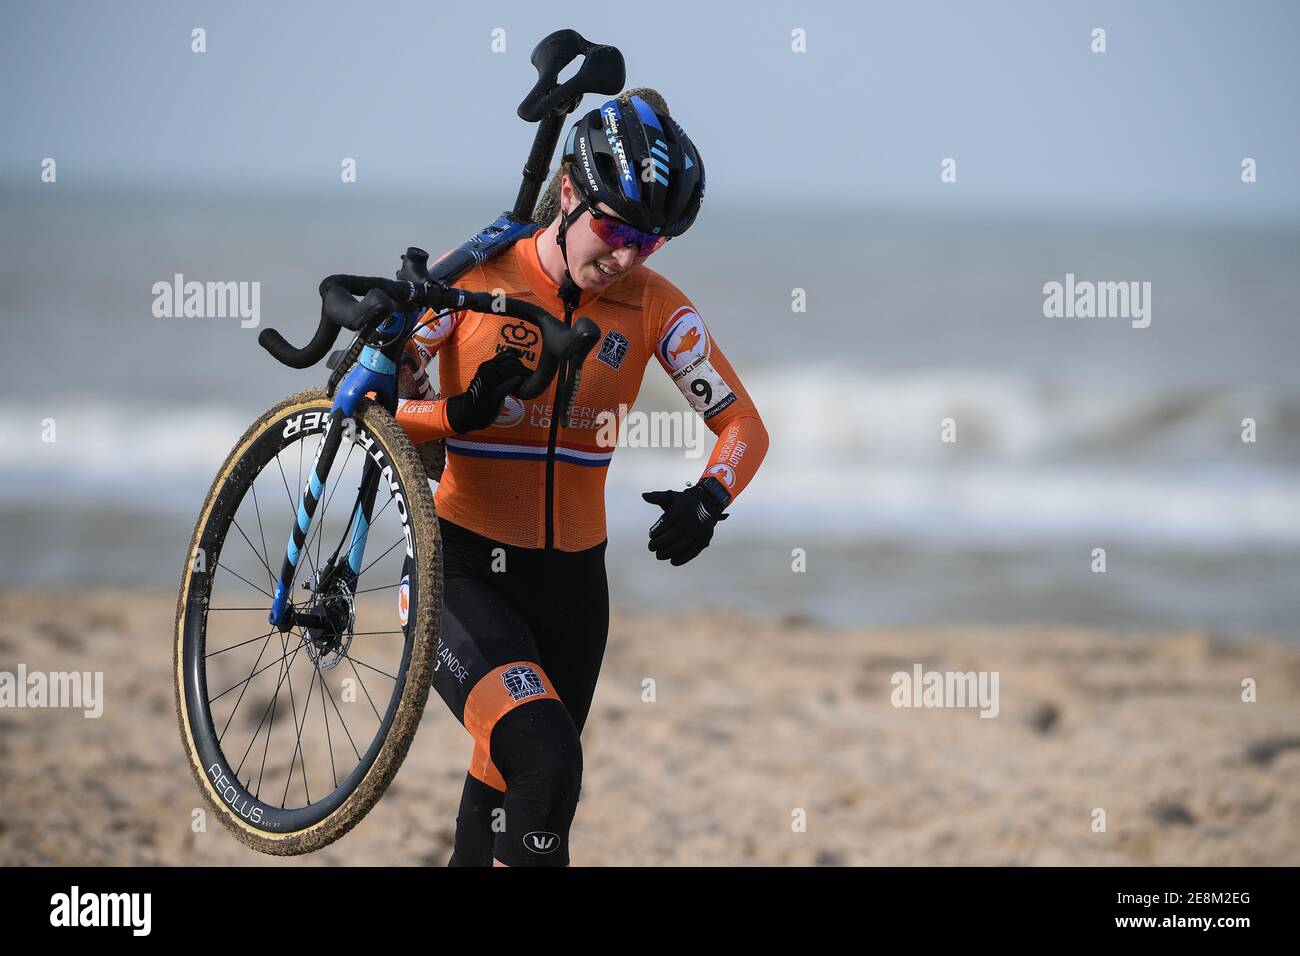 Dutch Shirin Van Anrooij pictured in action during the women's U23 race at the UCI Cyclocross World Championships, in Oostende, Belgium, Sunday 31 Jan Stock Photo